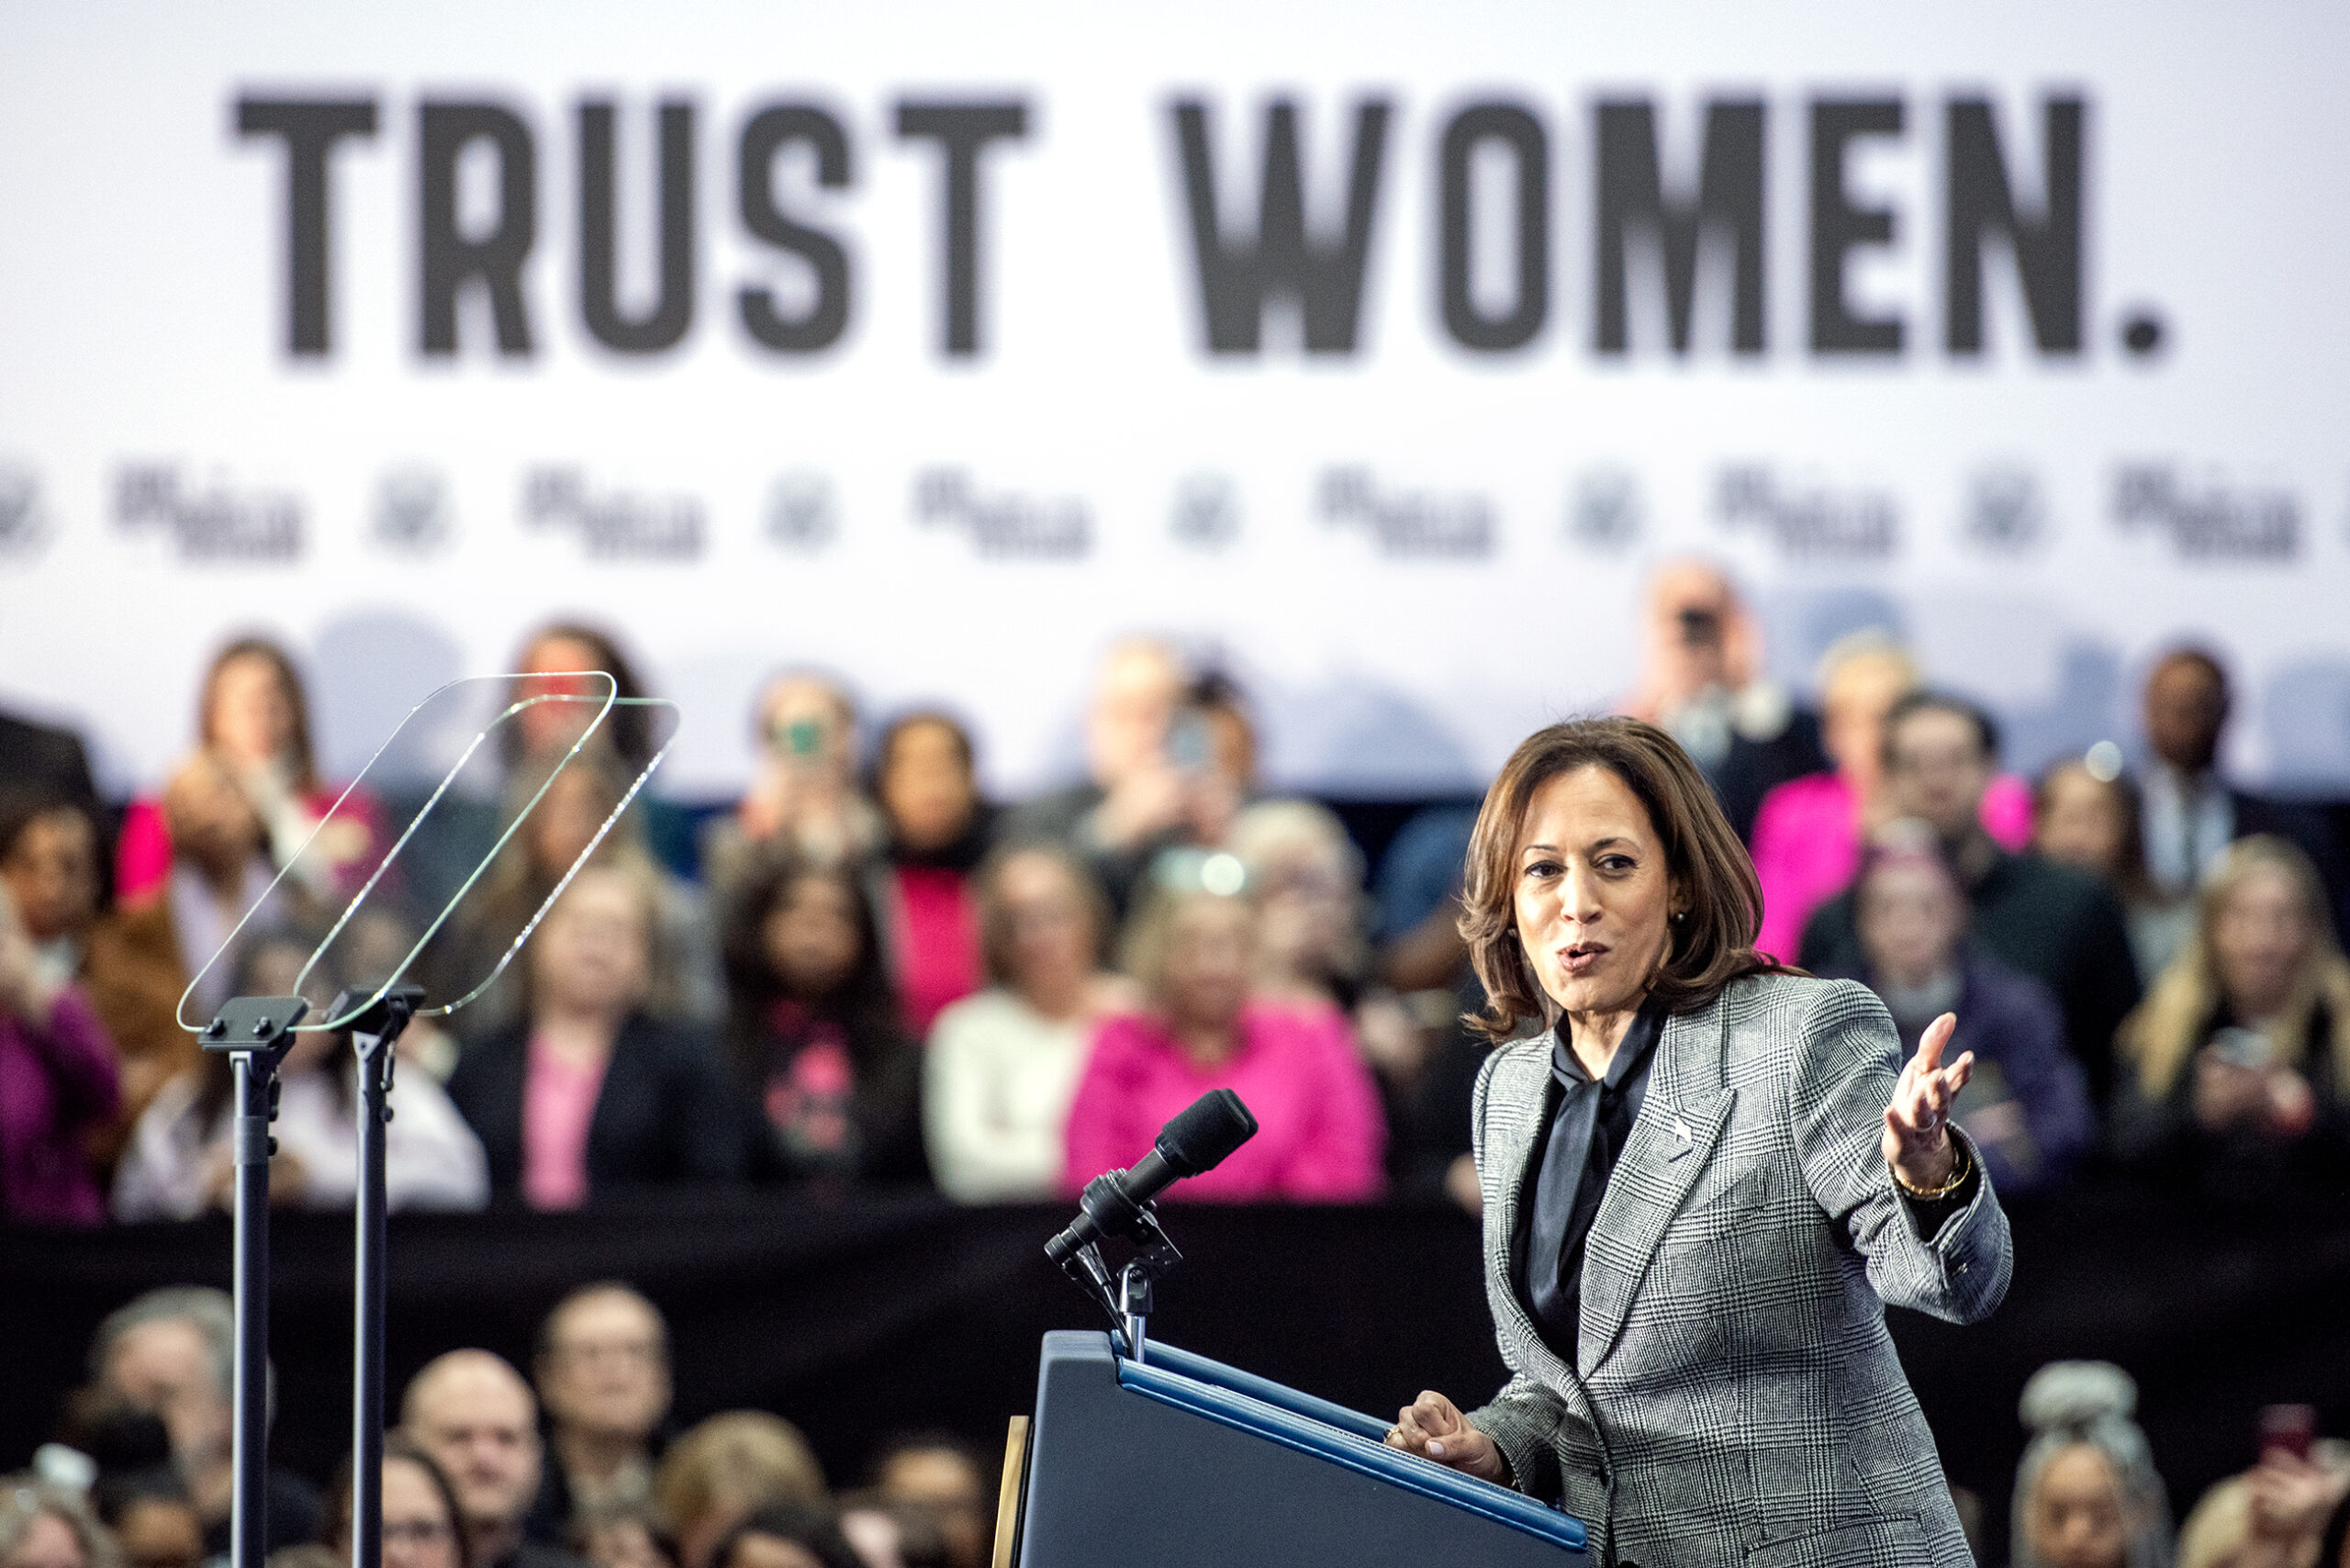 VP Harris gestures as she speaks at a podium. The words "TRUST WOMEN" appear behind her on a black and white banner.